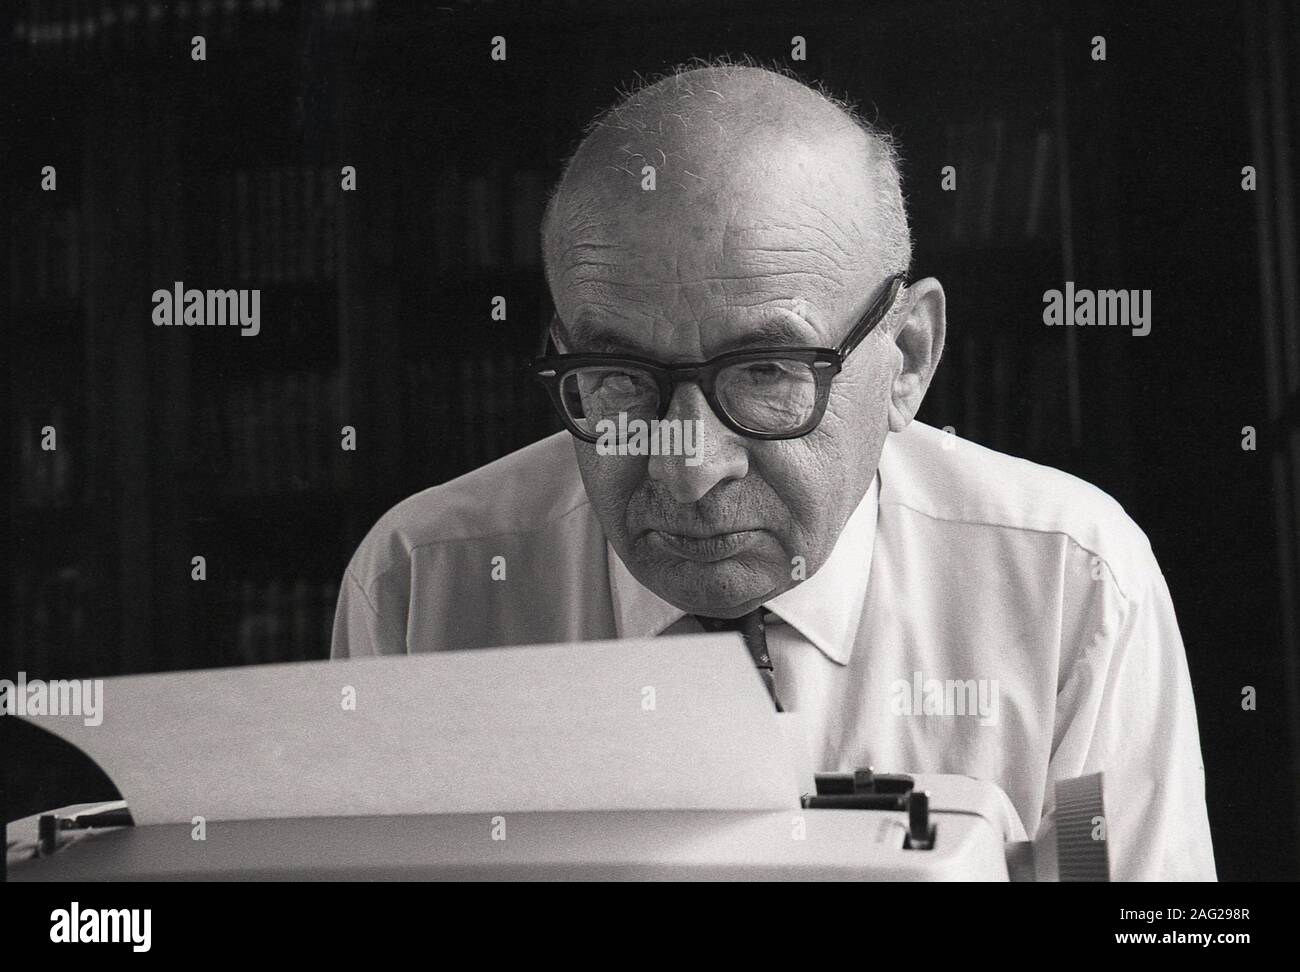 1964, historical, the american philospher, Paul Weiss sitting at his typewriter, at the University of Southern California, USA.  The son of Jewish emigrants, Weiss received a Ph. D from Harvard and as well as the founder of the journal, The Review of Metaphysics in 1943, was also the creator in 1950 of the Metaphysical Society of America. Stock Photo